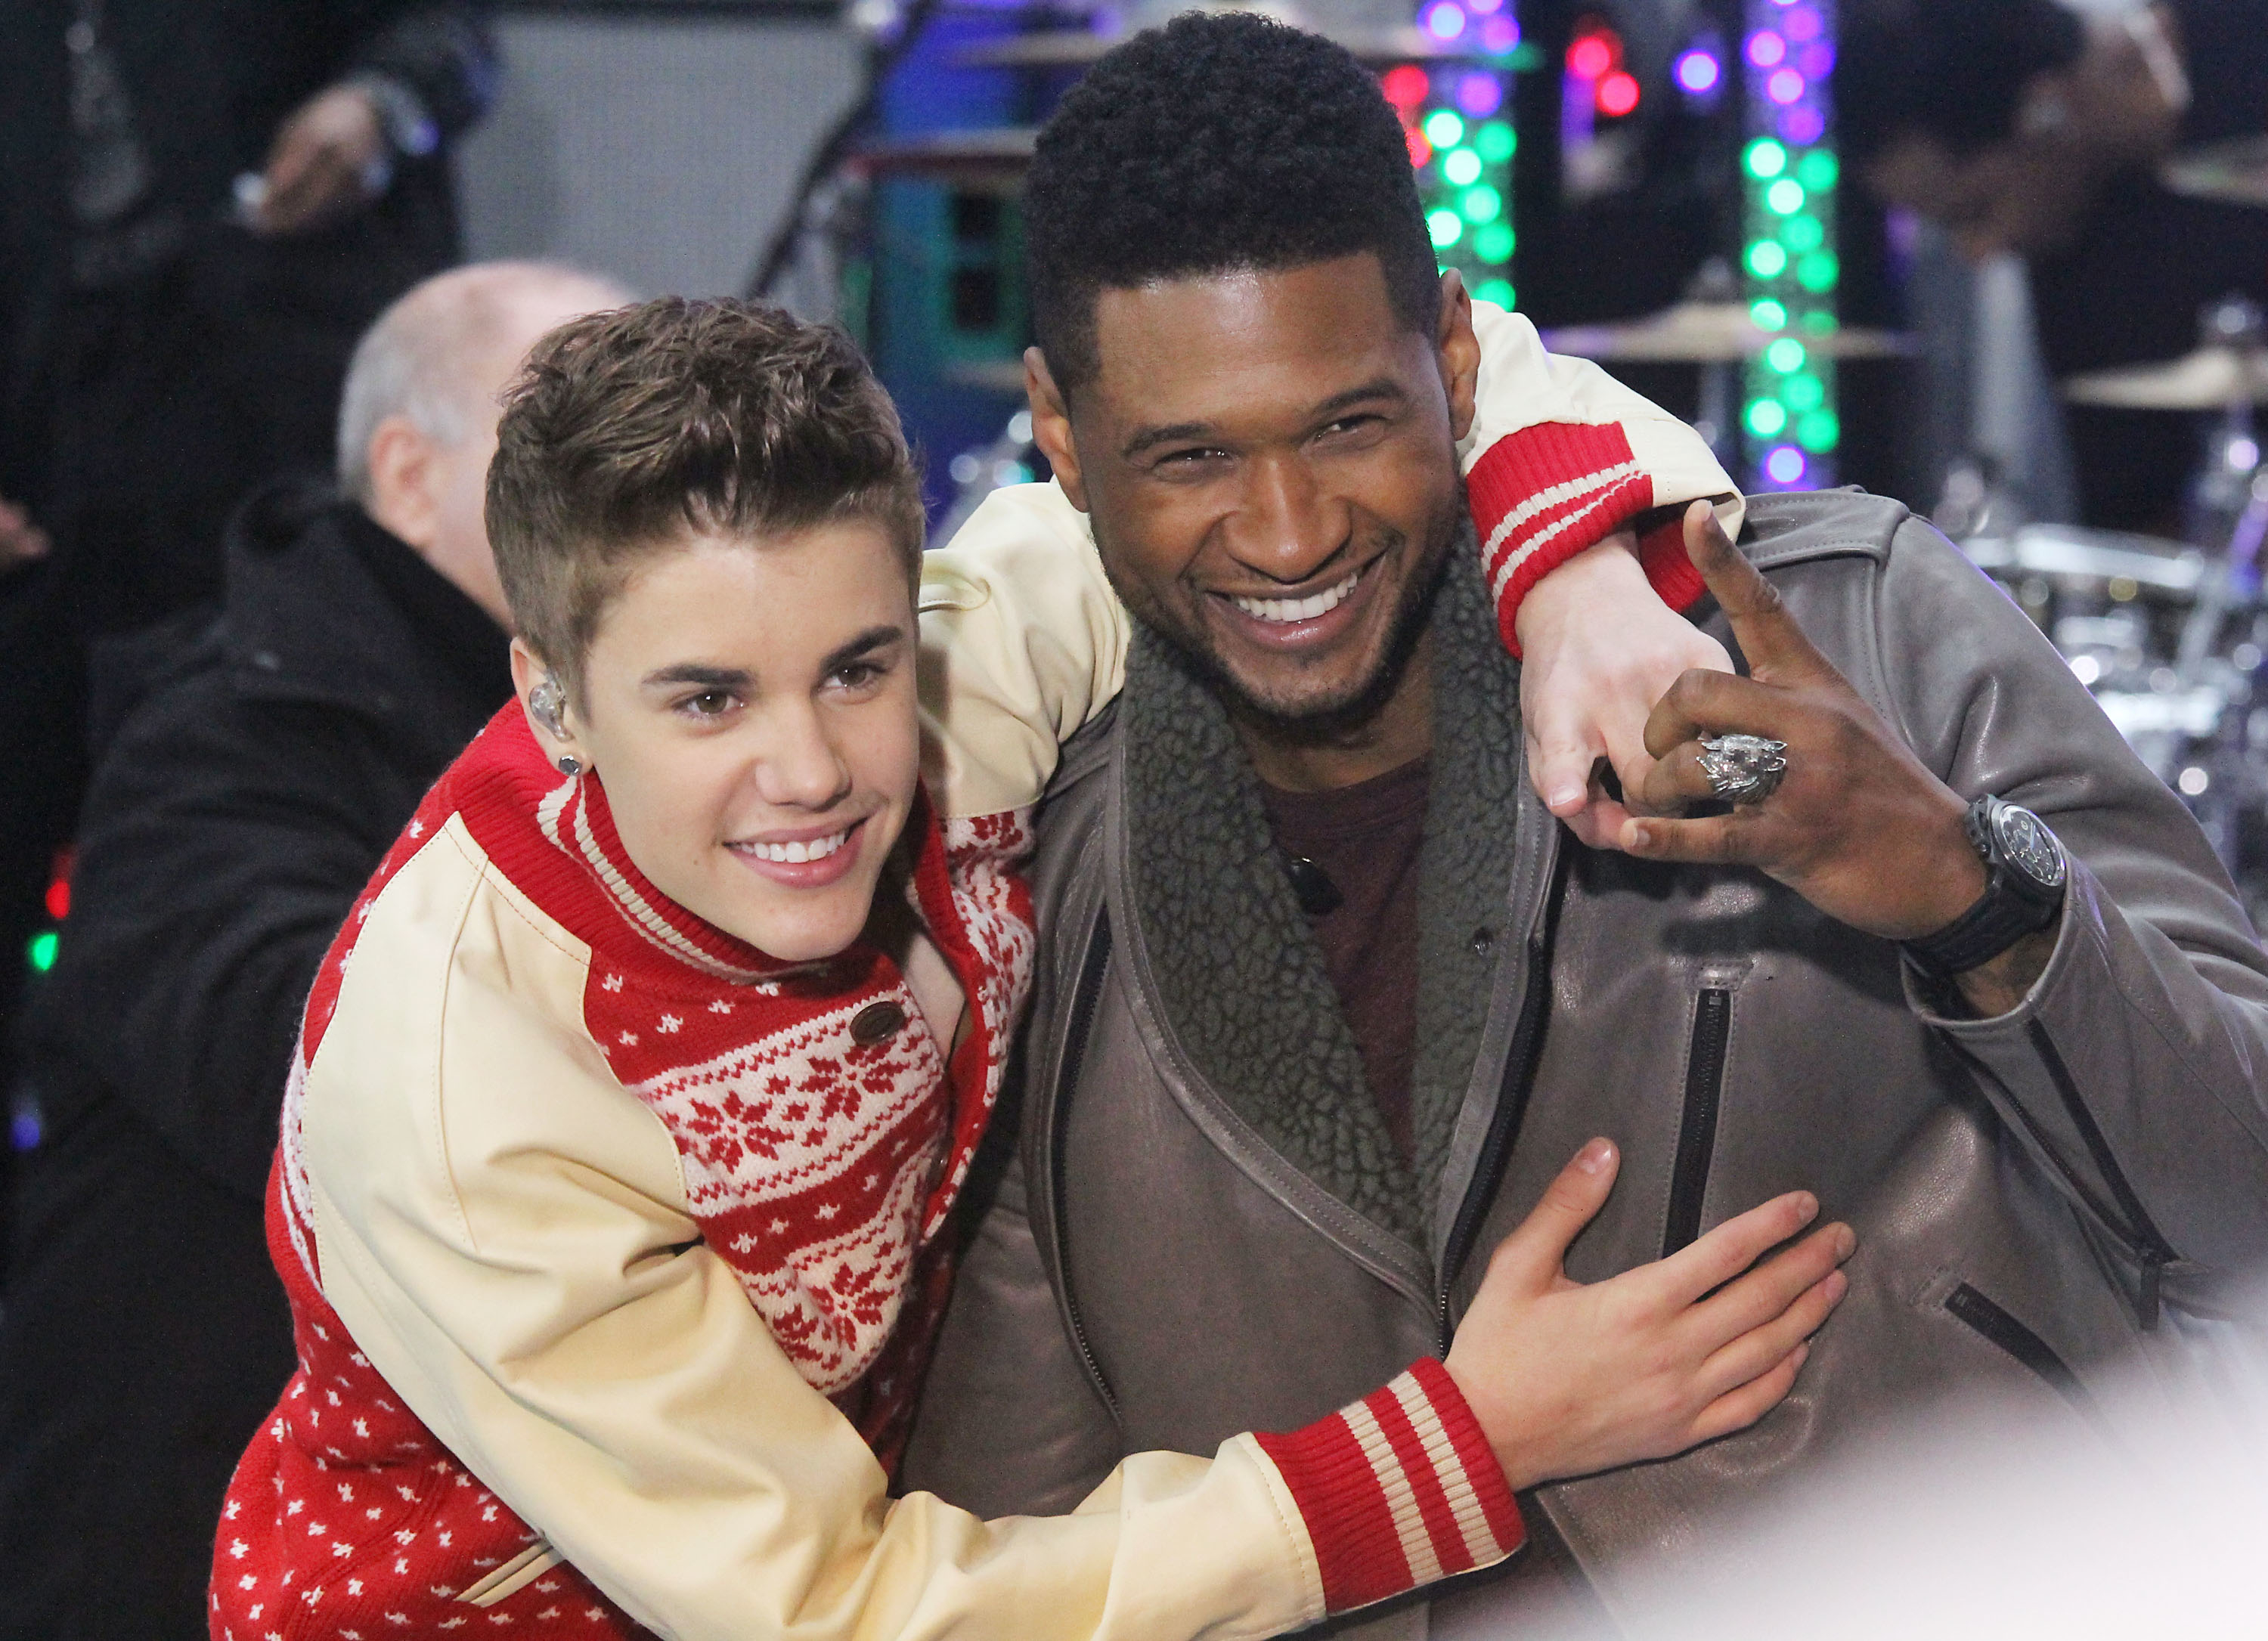 Justin Bieber and Usher smiling at a festive event, both in winter-themed attire